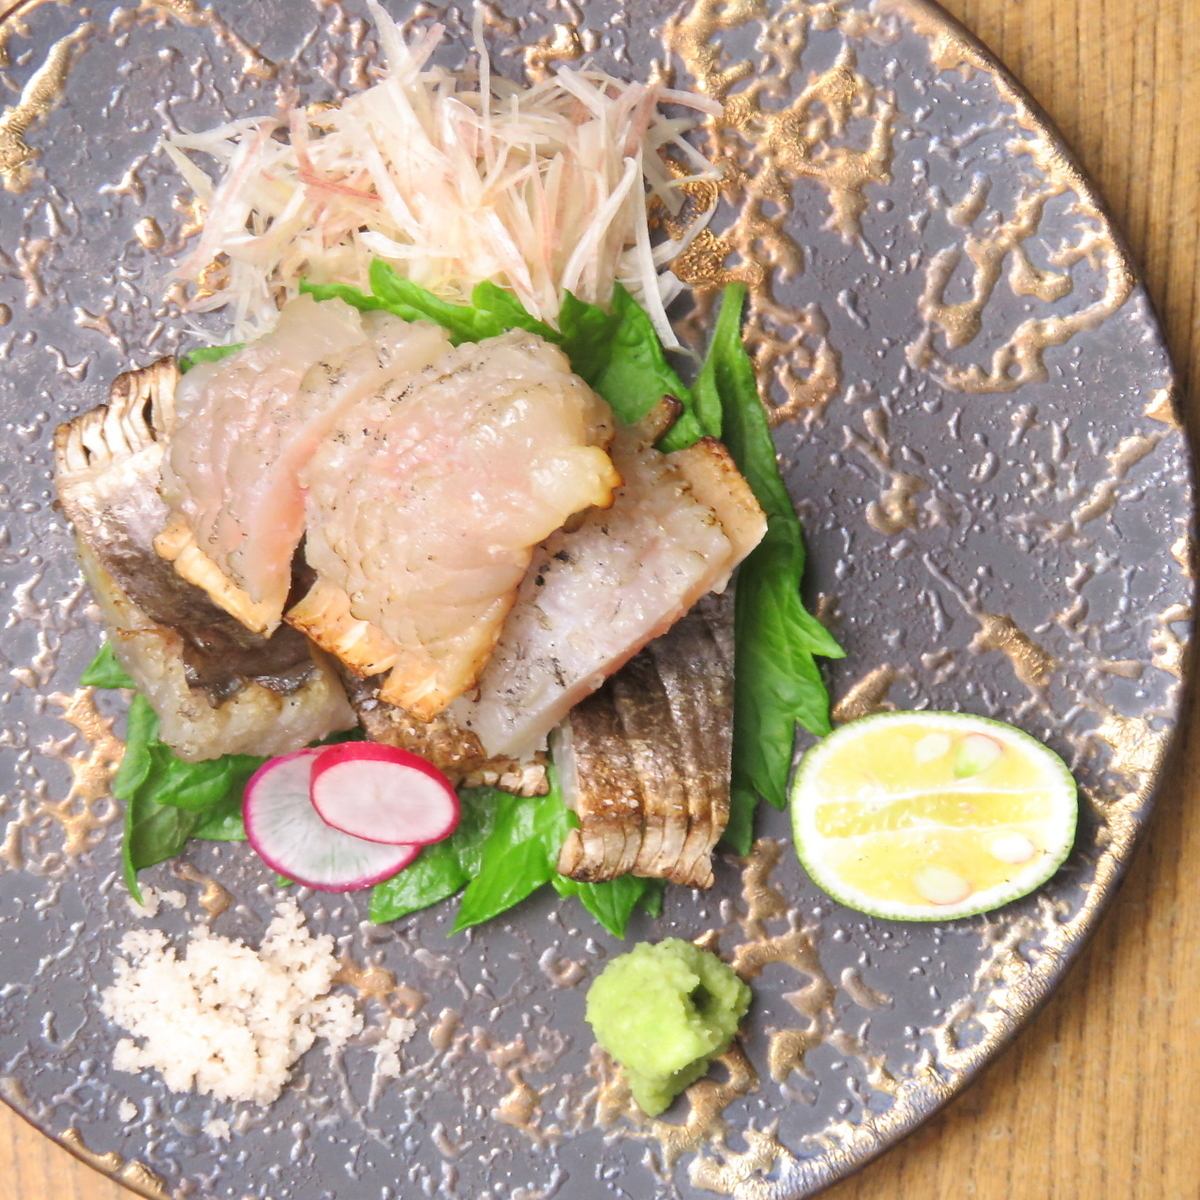 Straw-grilled seasonal ingredients.The classic bonito flakes are also available.